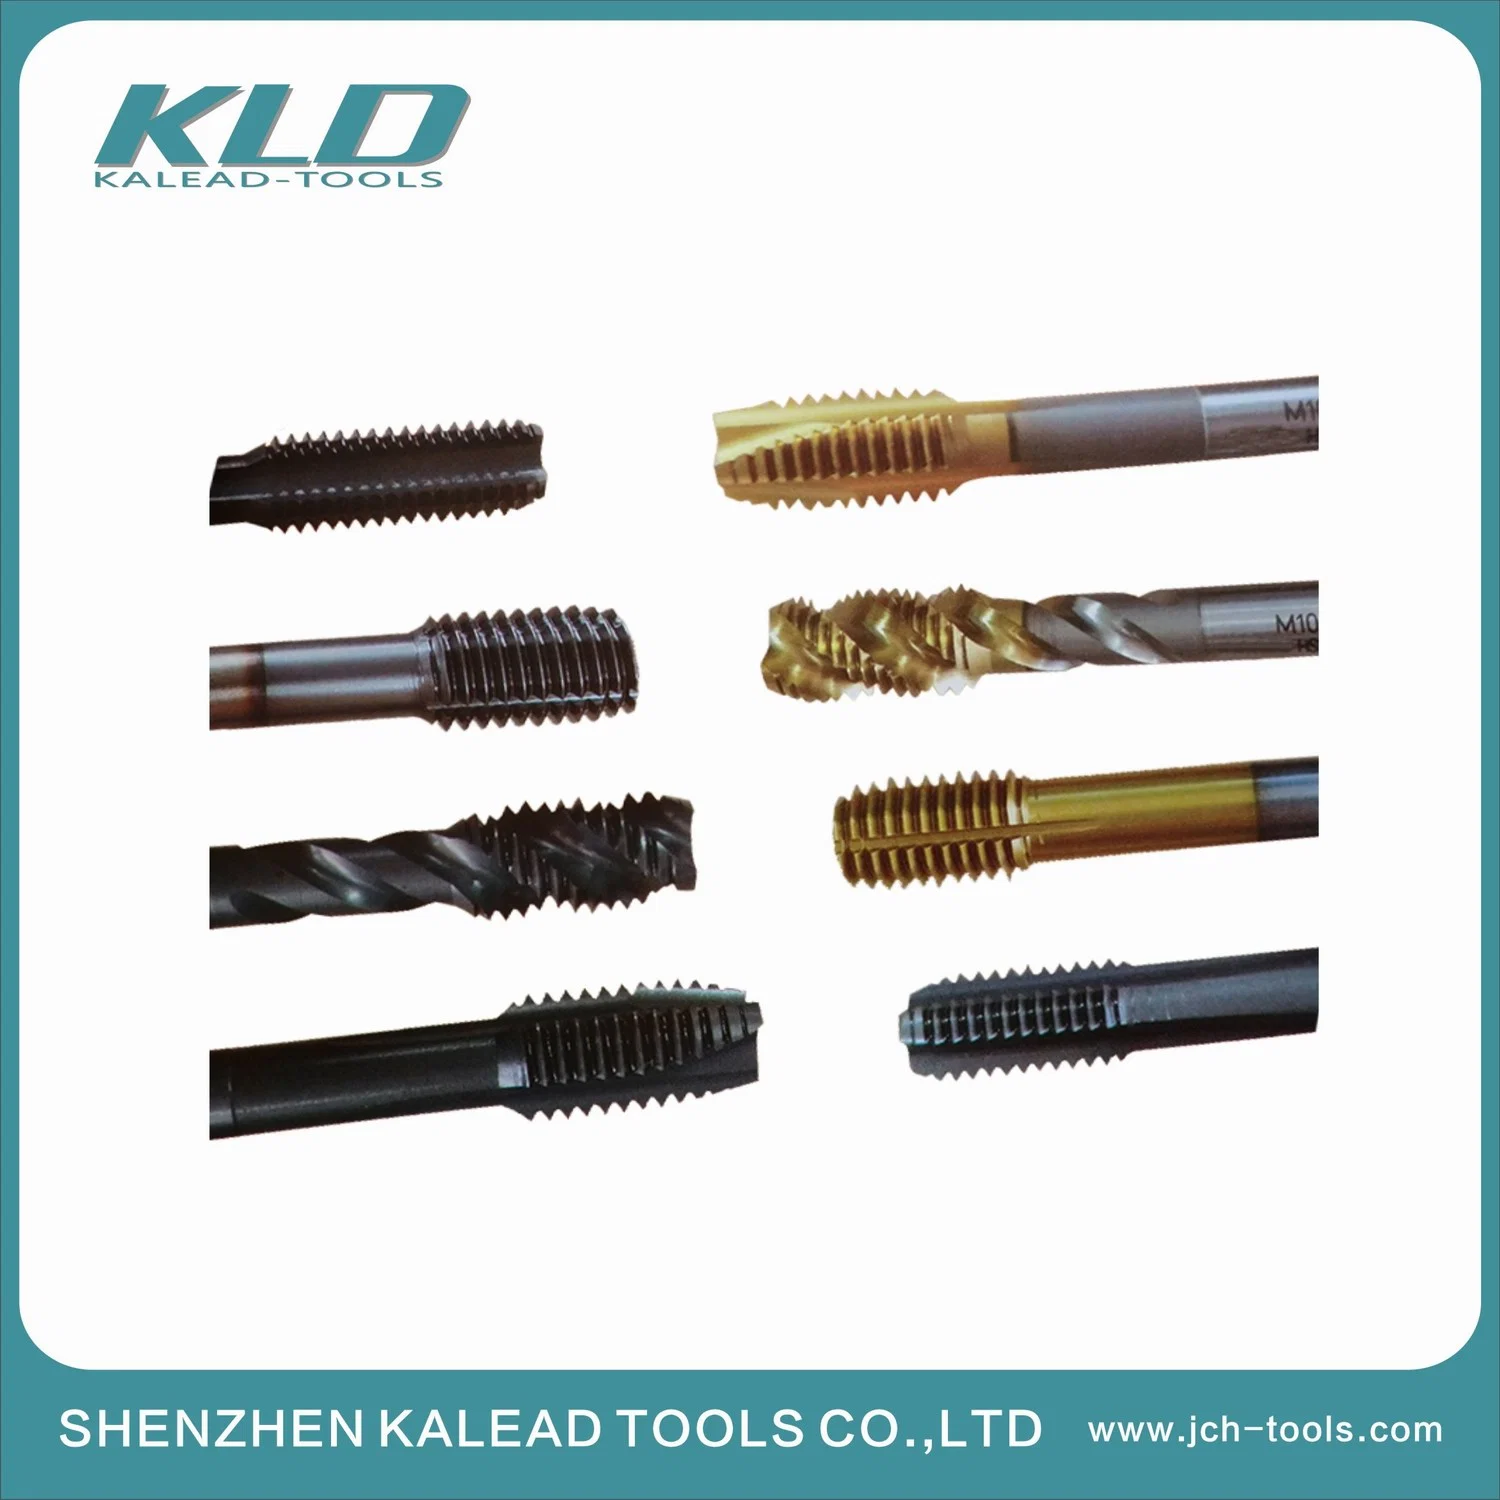 Customized Stainless Steel Thread Cutting Tools for CNC Machine Tools